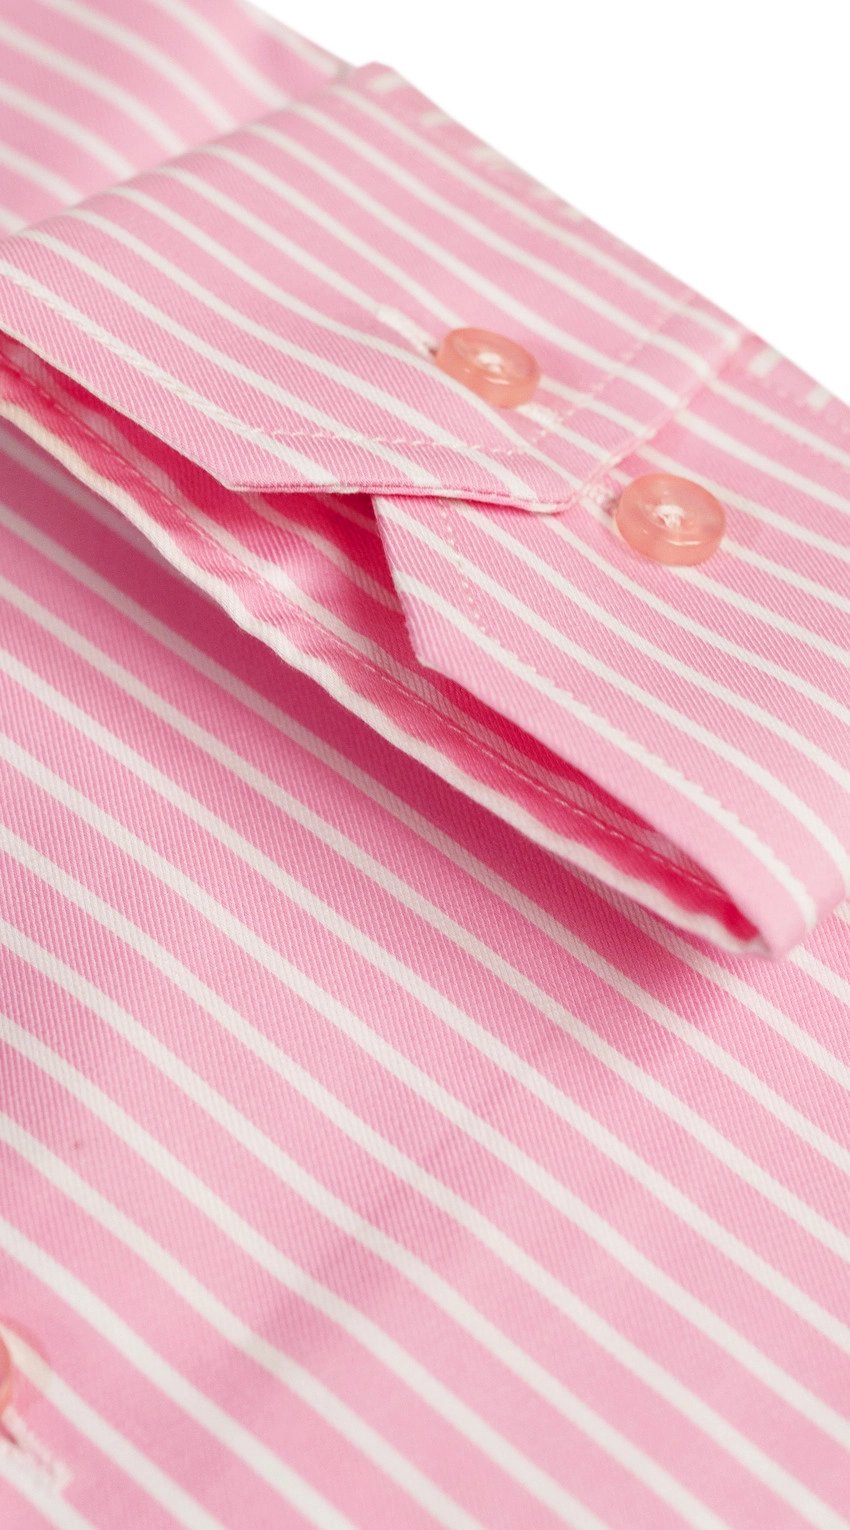 Chemise Rayures Rose et Blanche